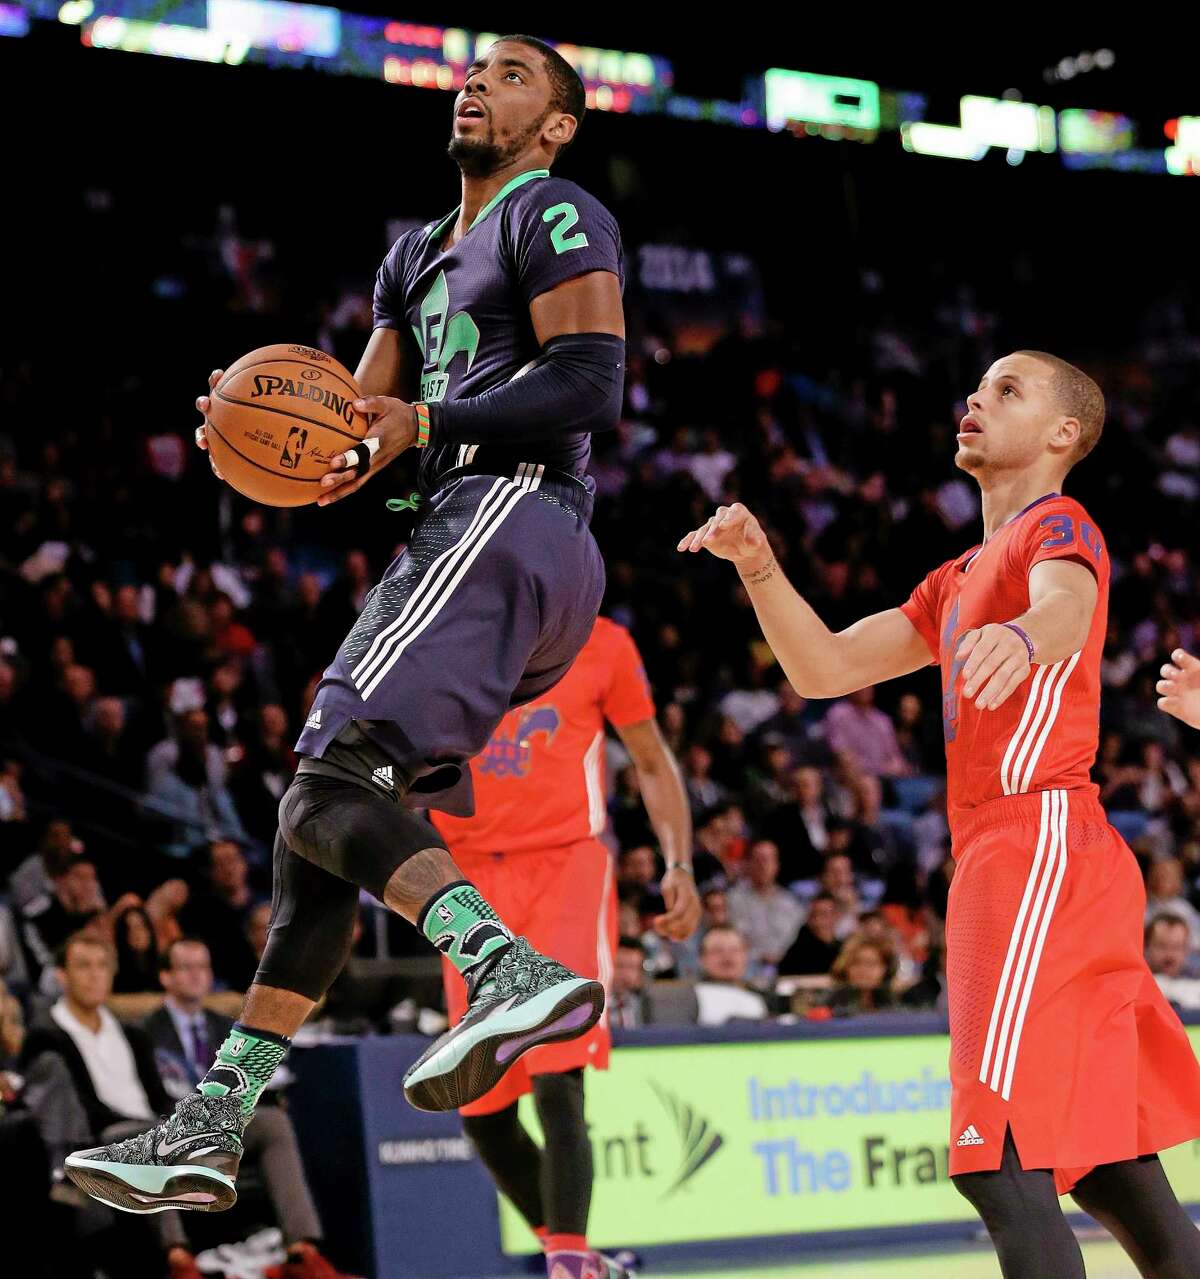 The East team’s Kyrie Irving goes to the hoop during the NBA All Star game Sunday in New Orleans.